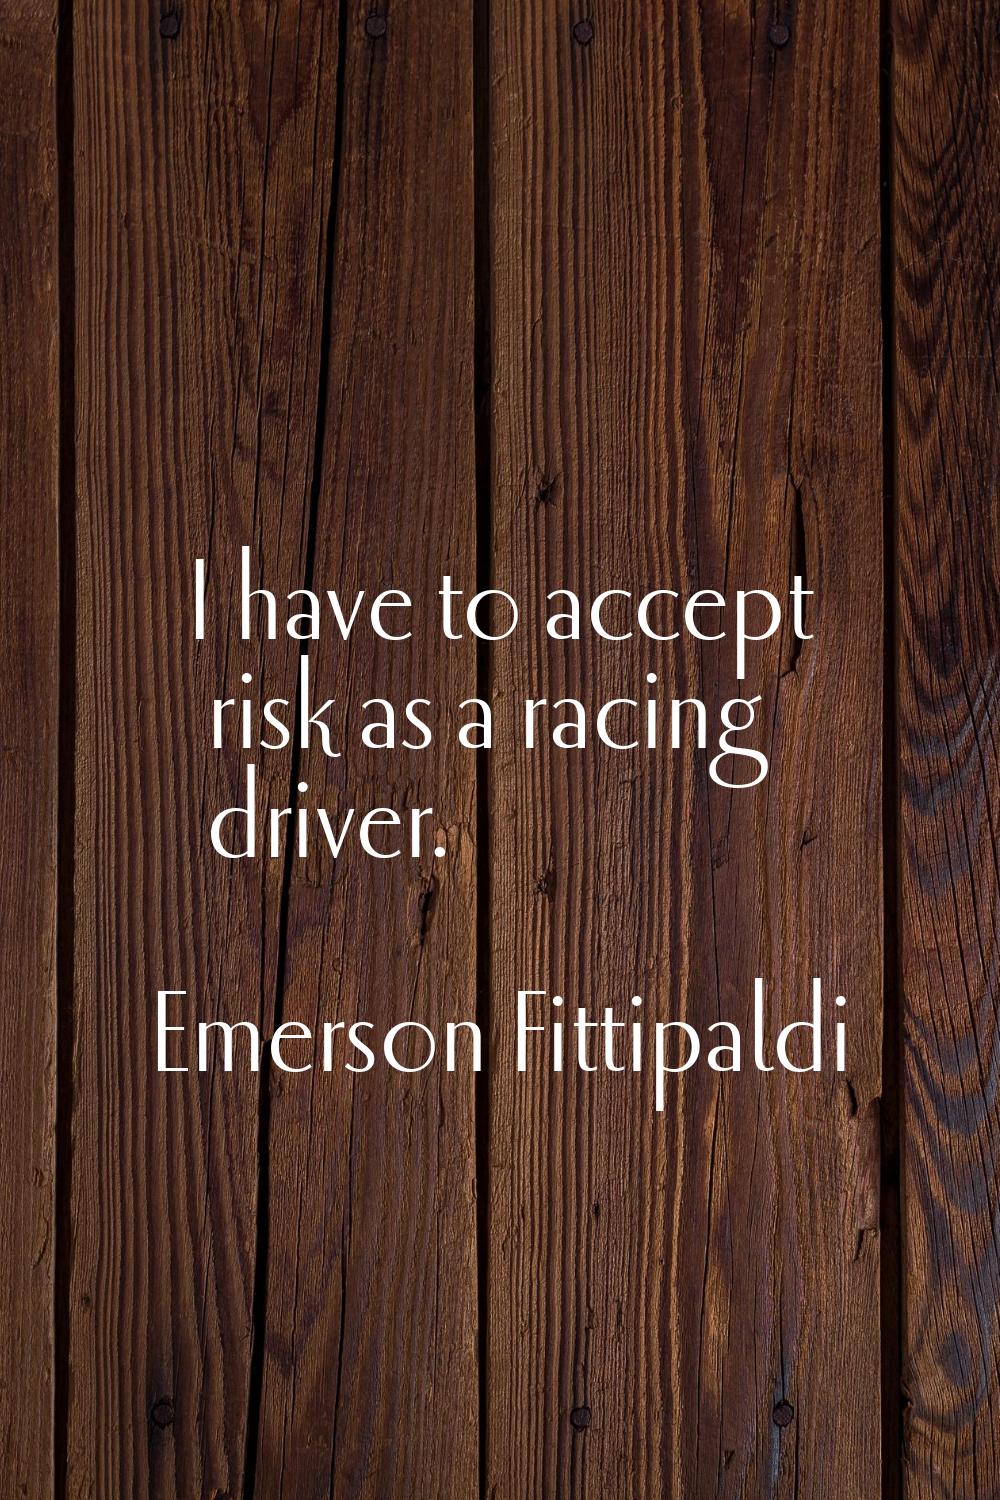 I have to accept risk as a racing driver.